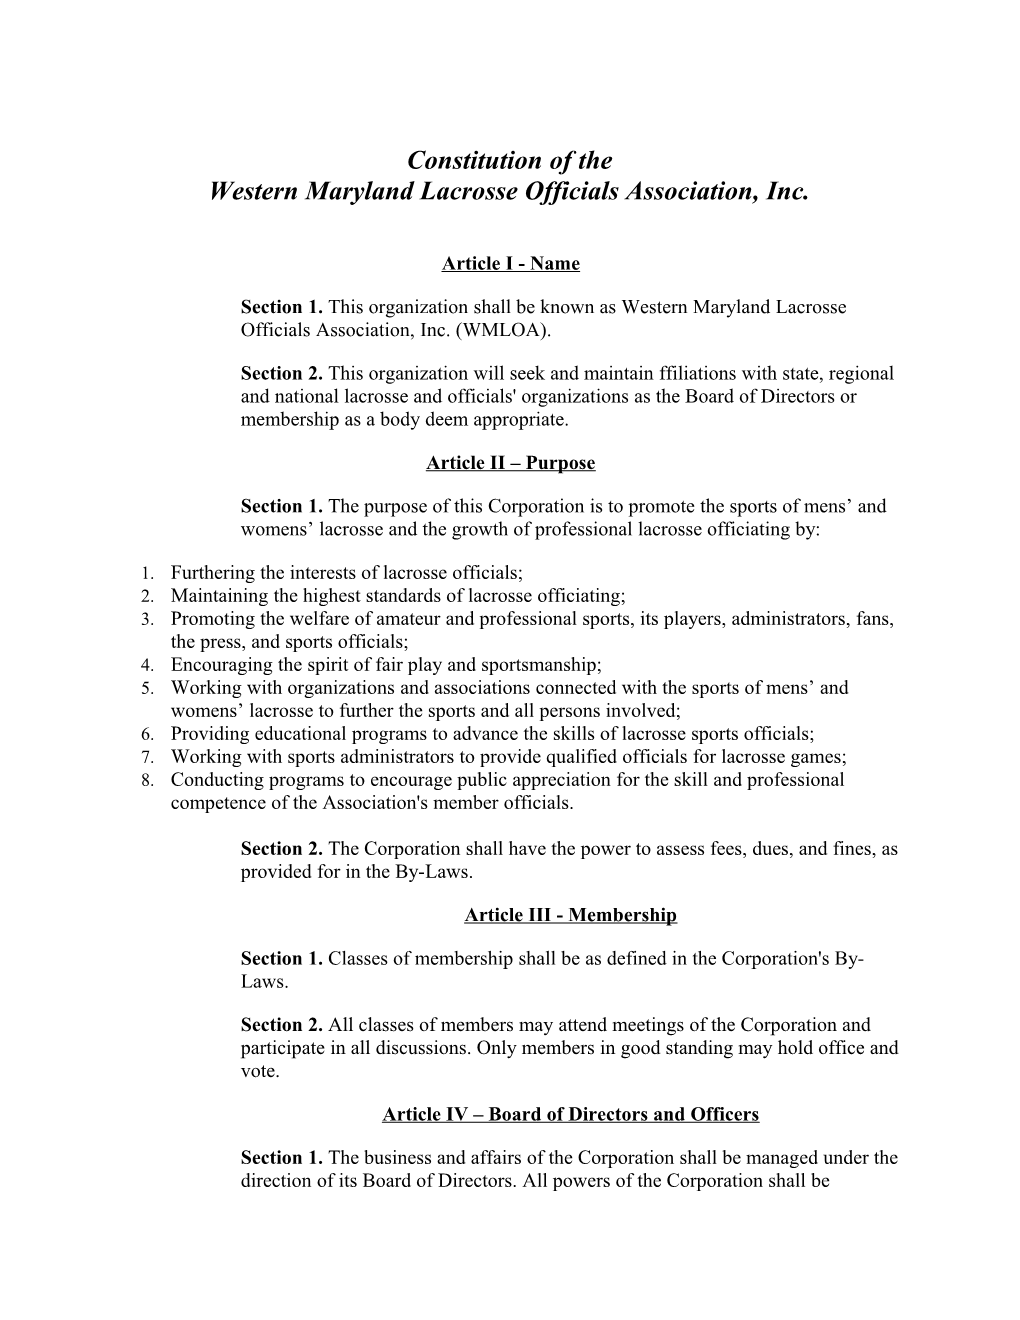 WMLOA Inc Constitution - Approved V1